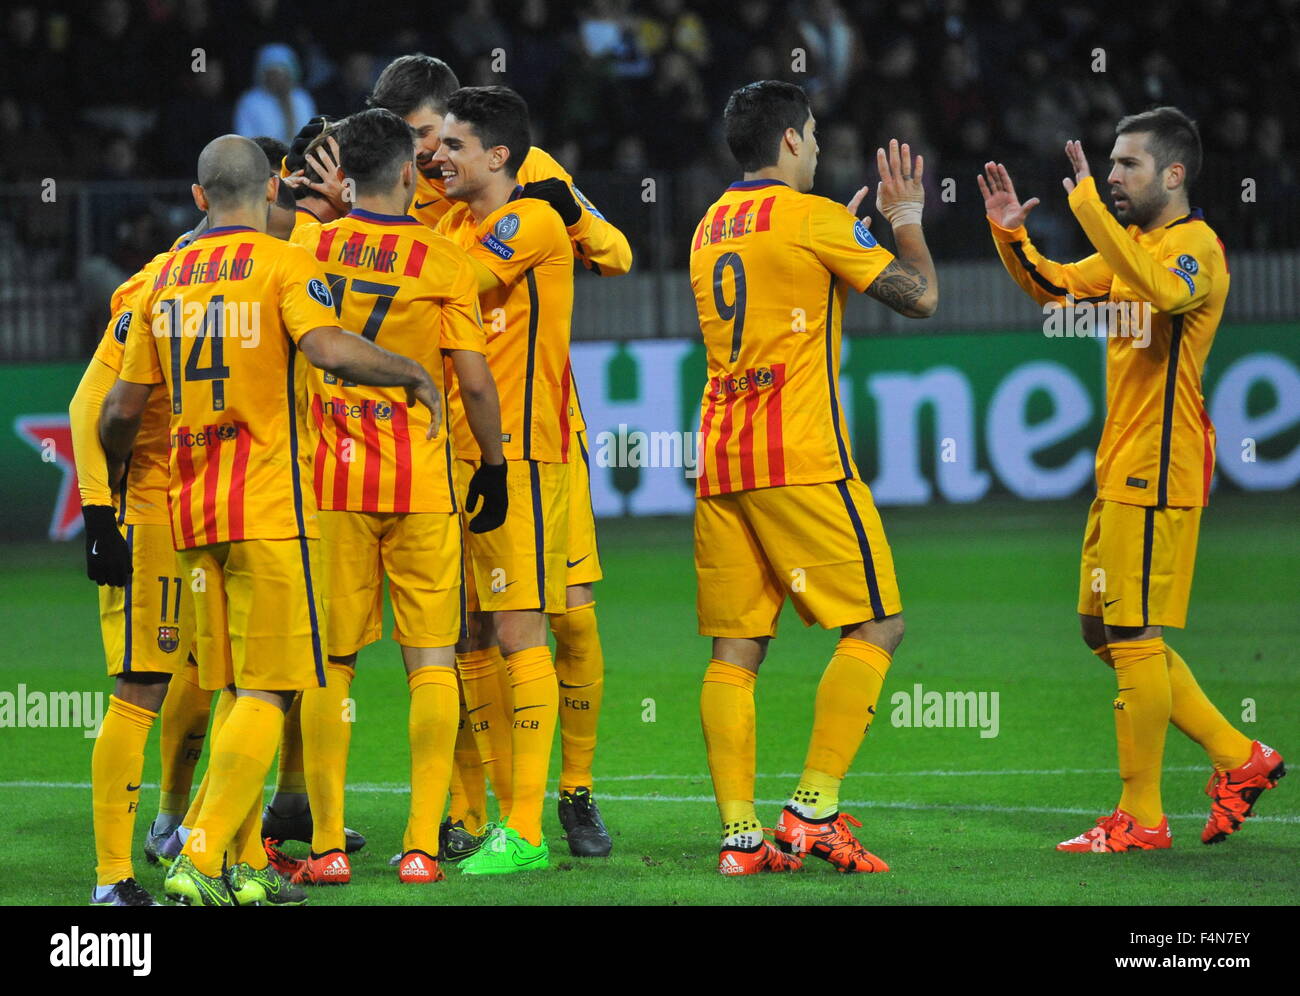 Barysaw Belarus th Oct 15 Barcelona S Players Celebrate Scoring In The 15 16 Uefa Champions League Group E Round 3 Football Match Against Bate Borisov At Borisov Arena Fc Barcelona Spain Won The